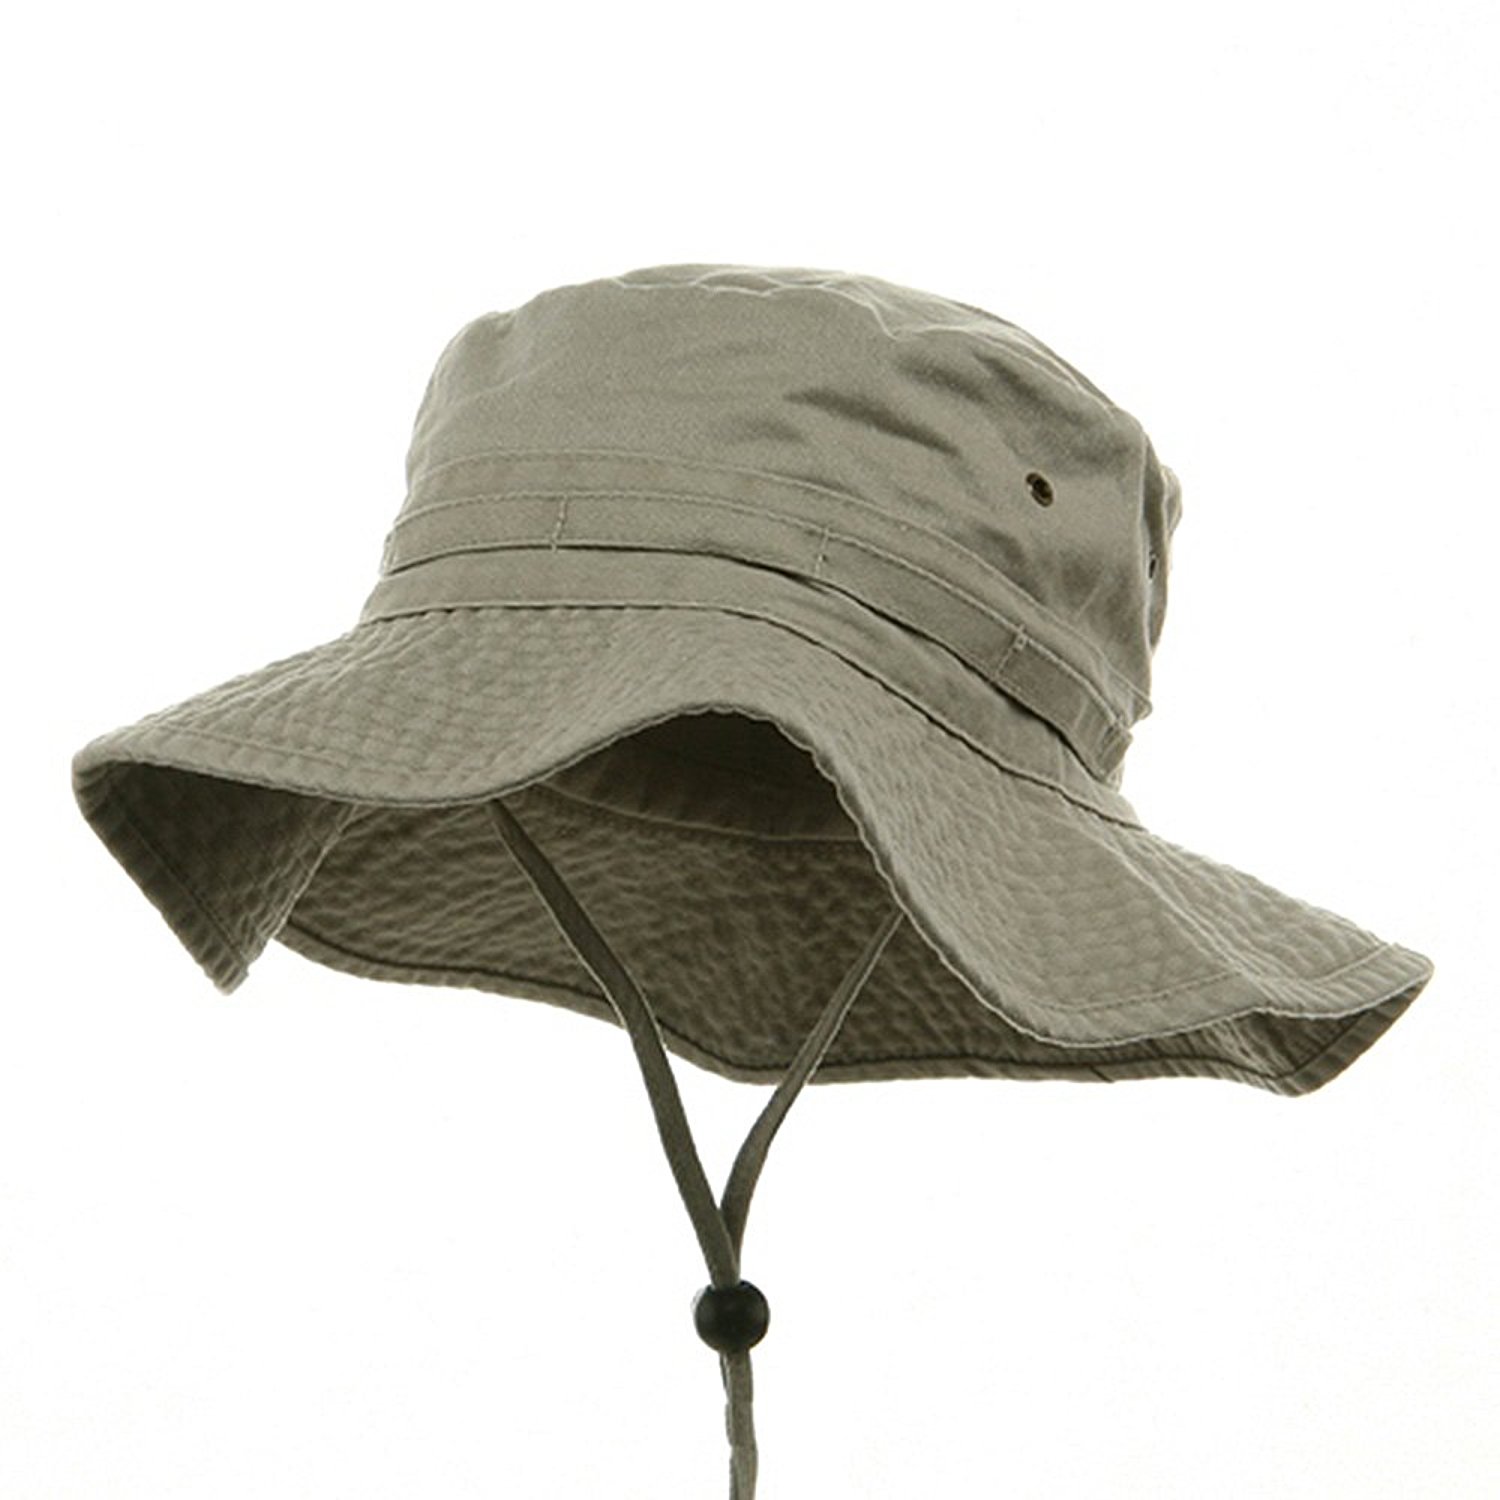 Fishing Hat (02)-Beige W10S30F at Amazon Men's Clothing store ...